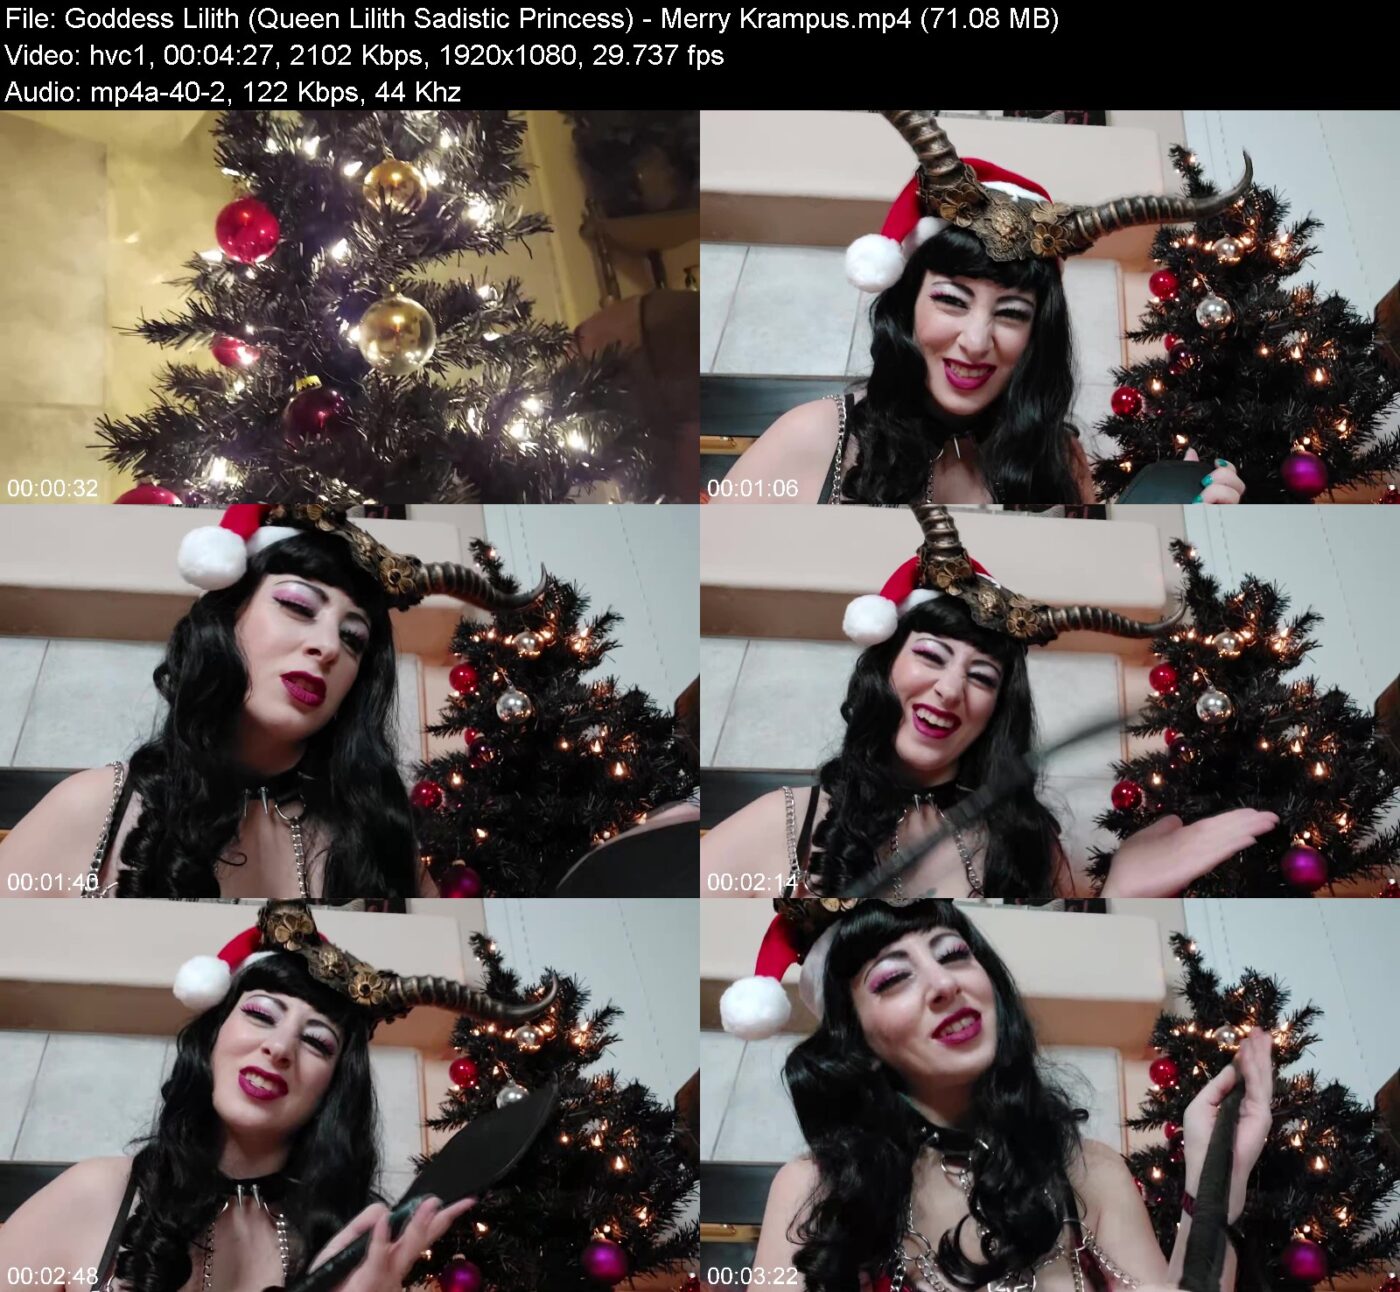 Goddess Lilith (Queen Lilith Sadistic Princess) in Merry Krampus